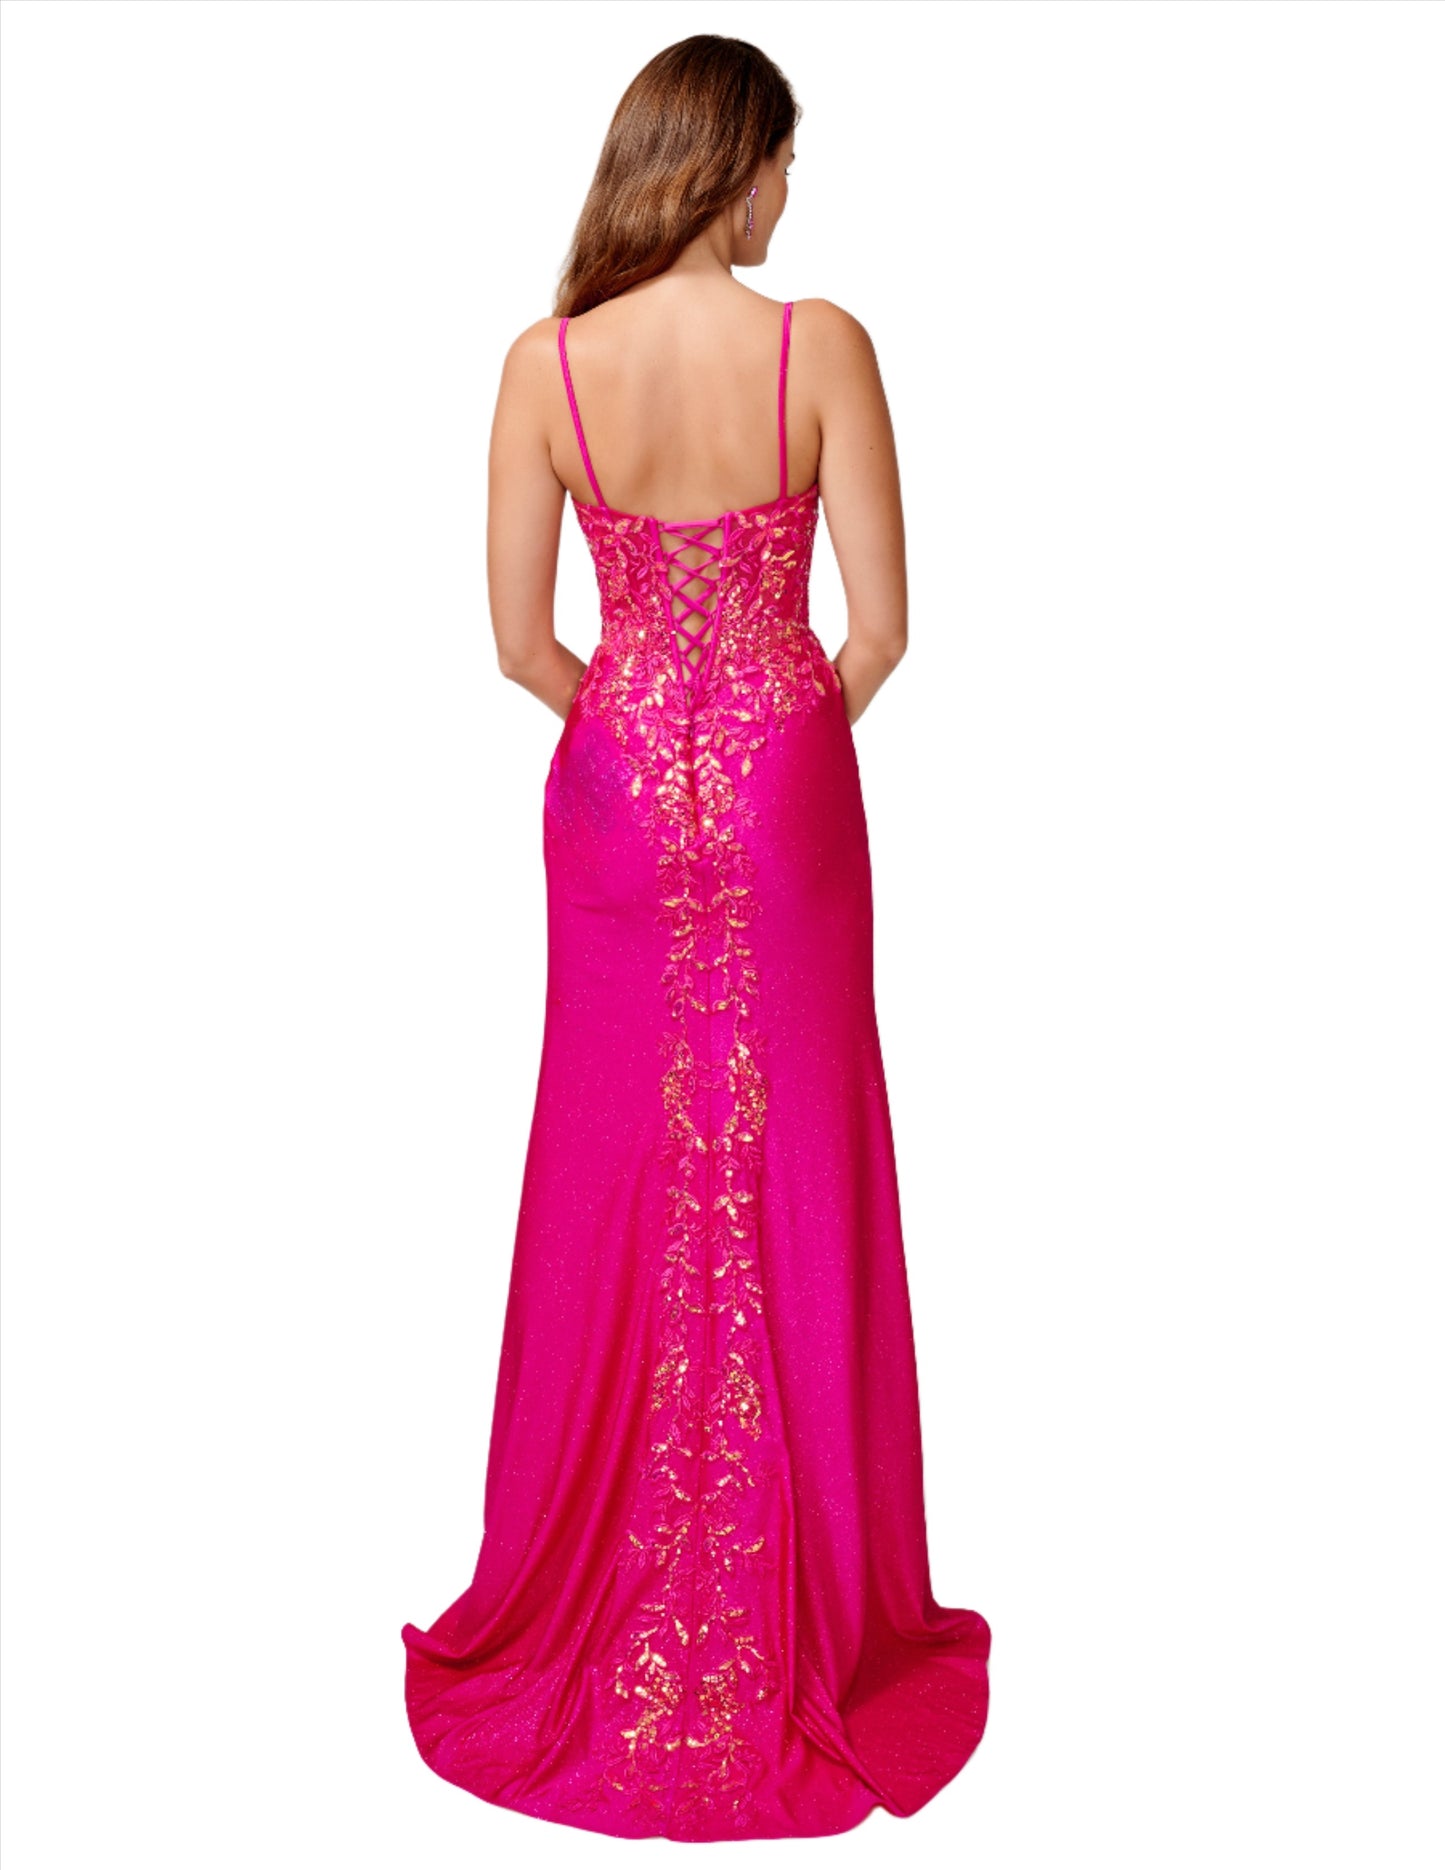 The Nina Canacci 3260 is a stunning fuchsia prom dress featuring a sheer sequin lace corset style bodice and a sheer sequin lace design running down train. The shimmer and embellishments add a touch of glamour and the slit enhances movement and flow. Perfect for formal events.